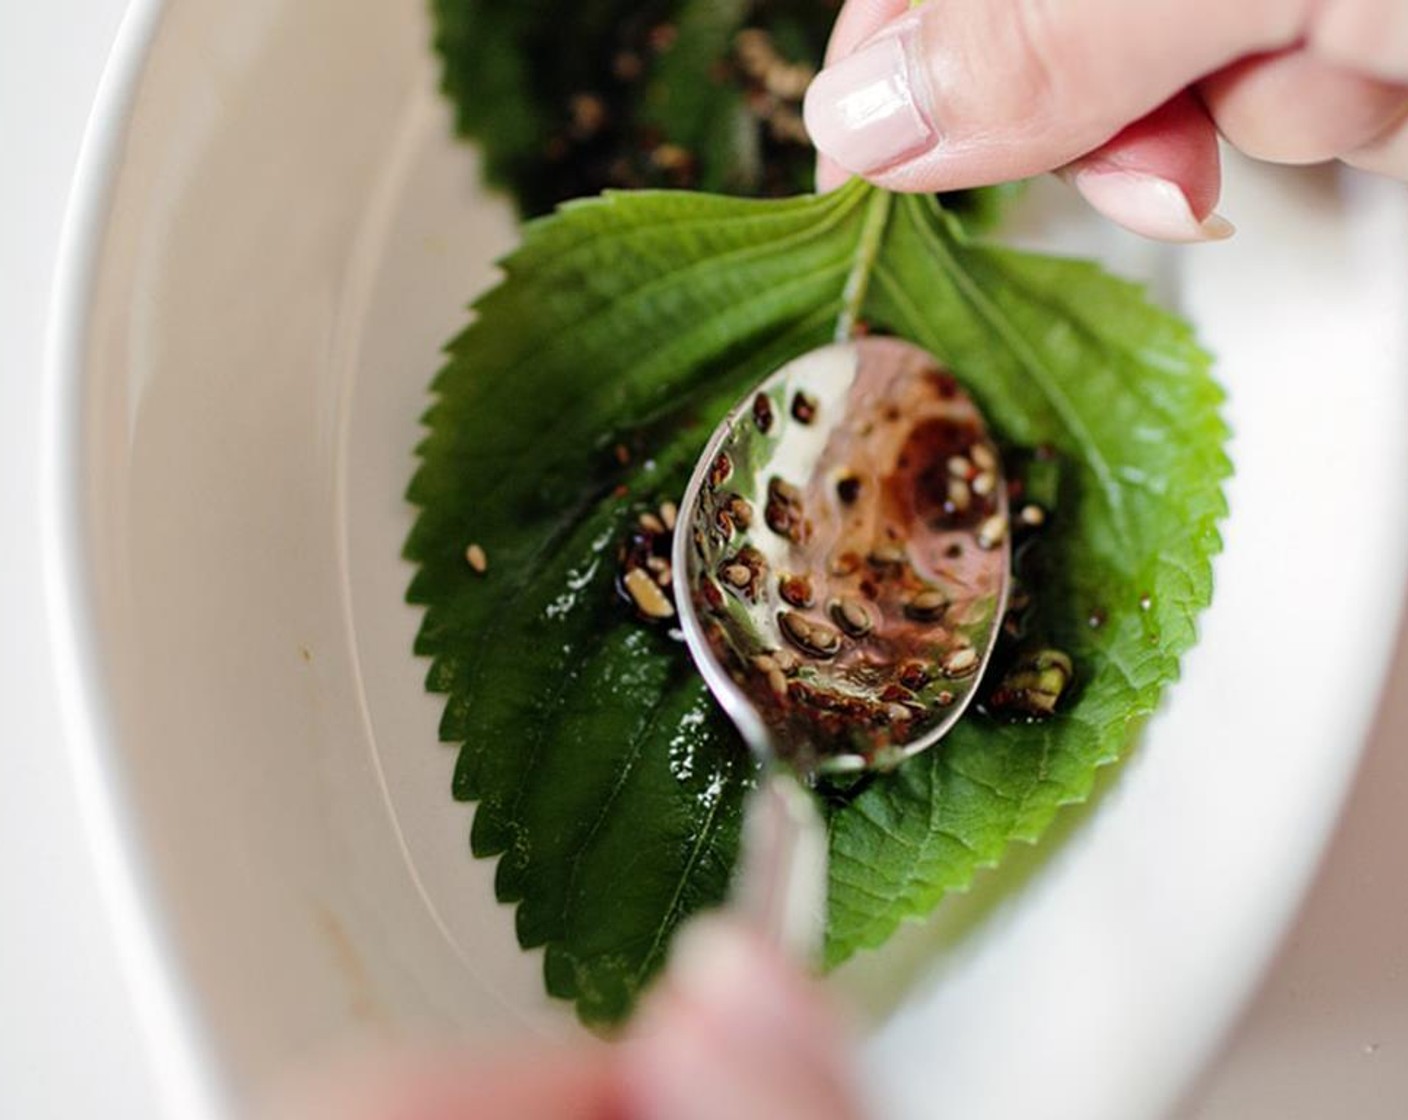 step 2 Use 1/4 tsp of marinade and use a spoon to spread over each Perilla Leaves (60). Stack the next leaf and continue until they are covered with marinade.